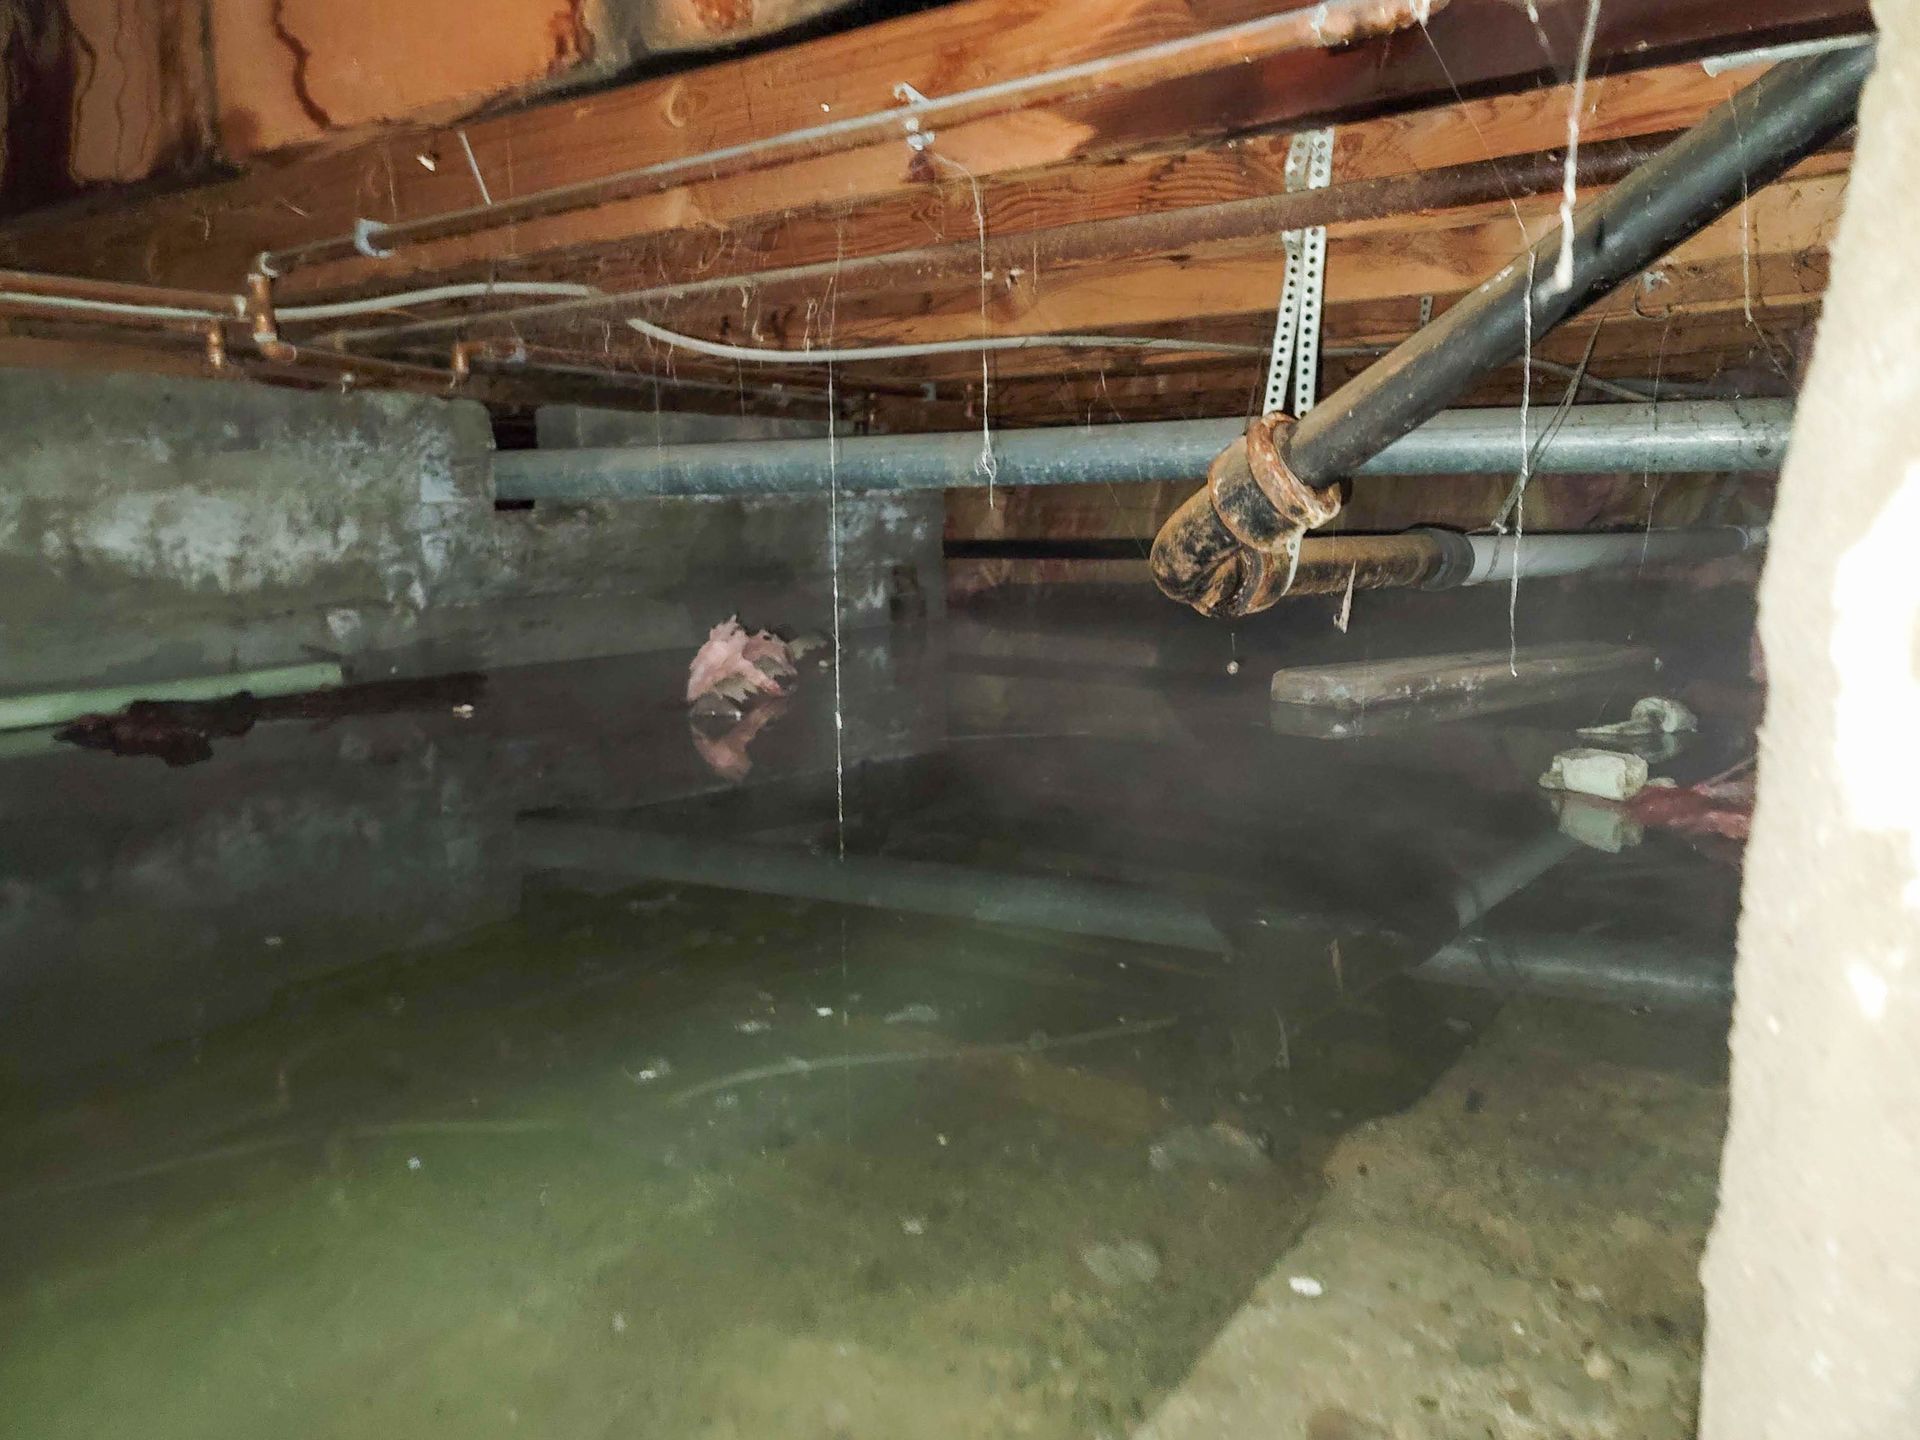 Water crawl space - South Bend, IN - A&M Home Services